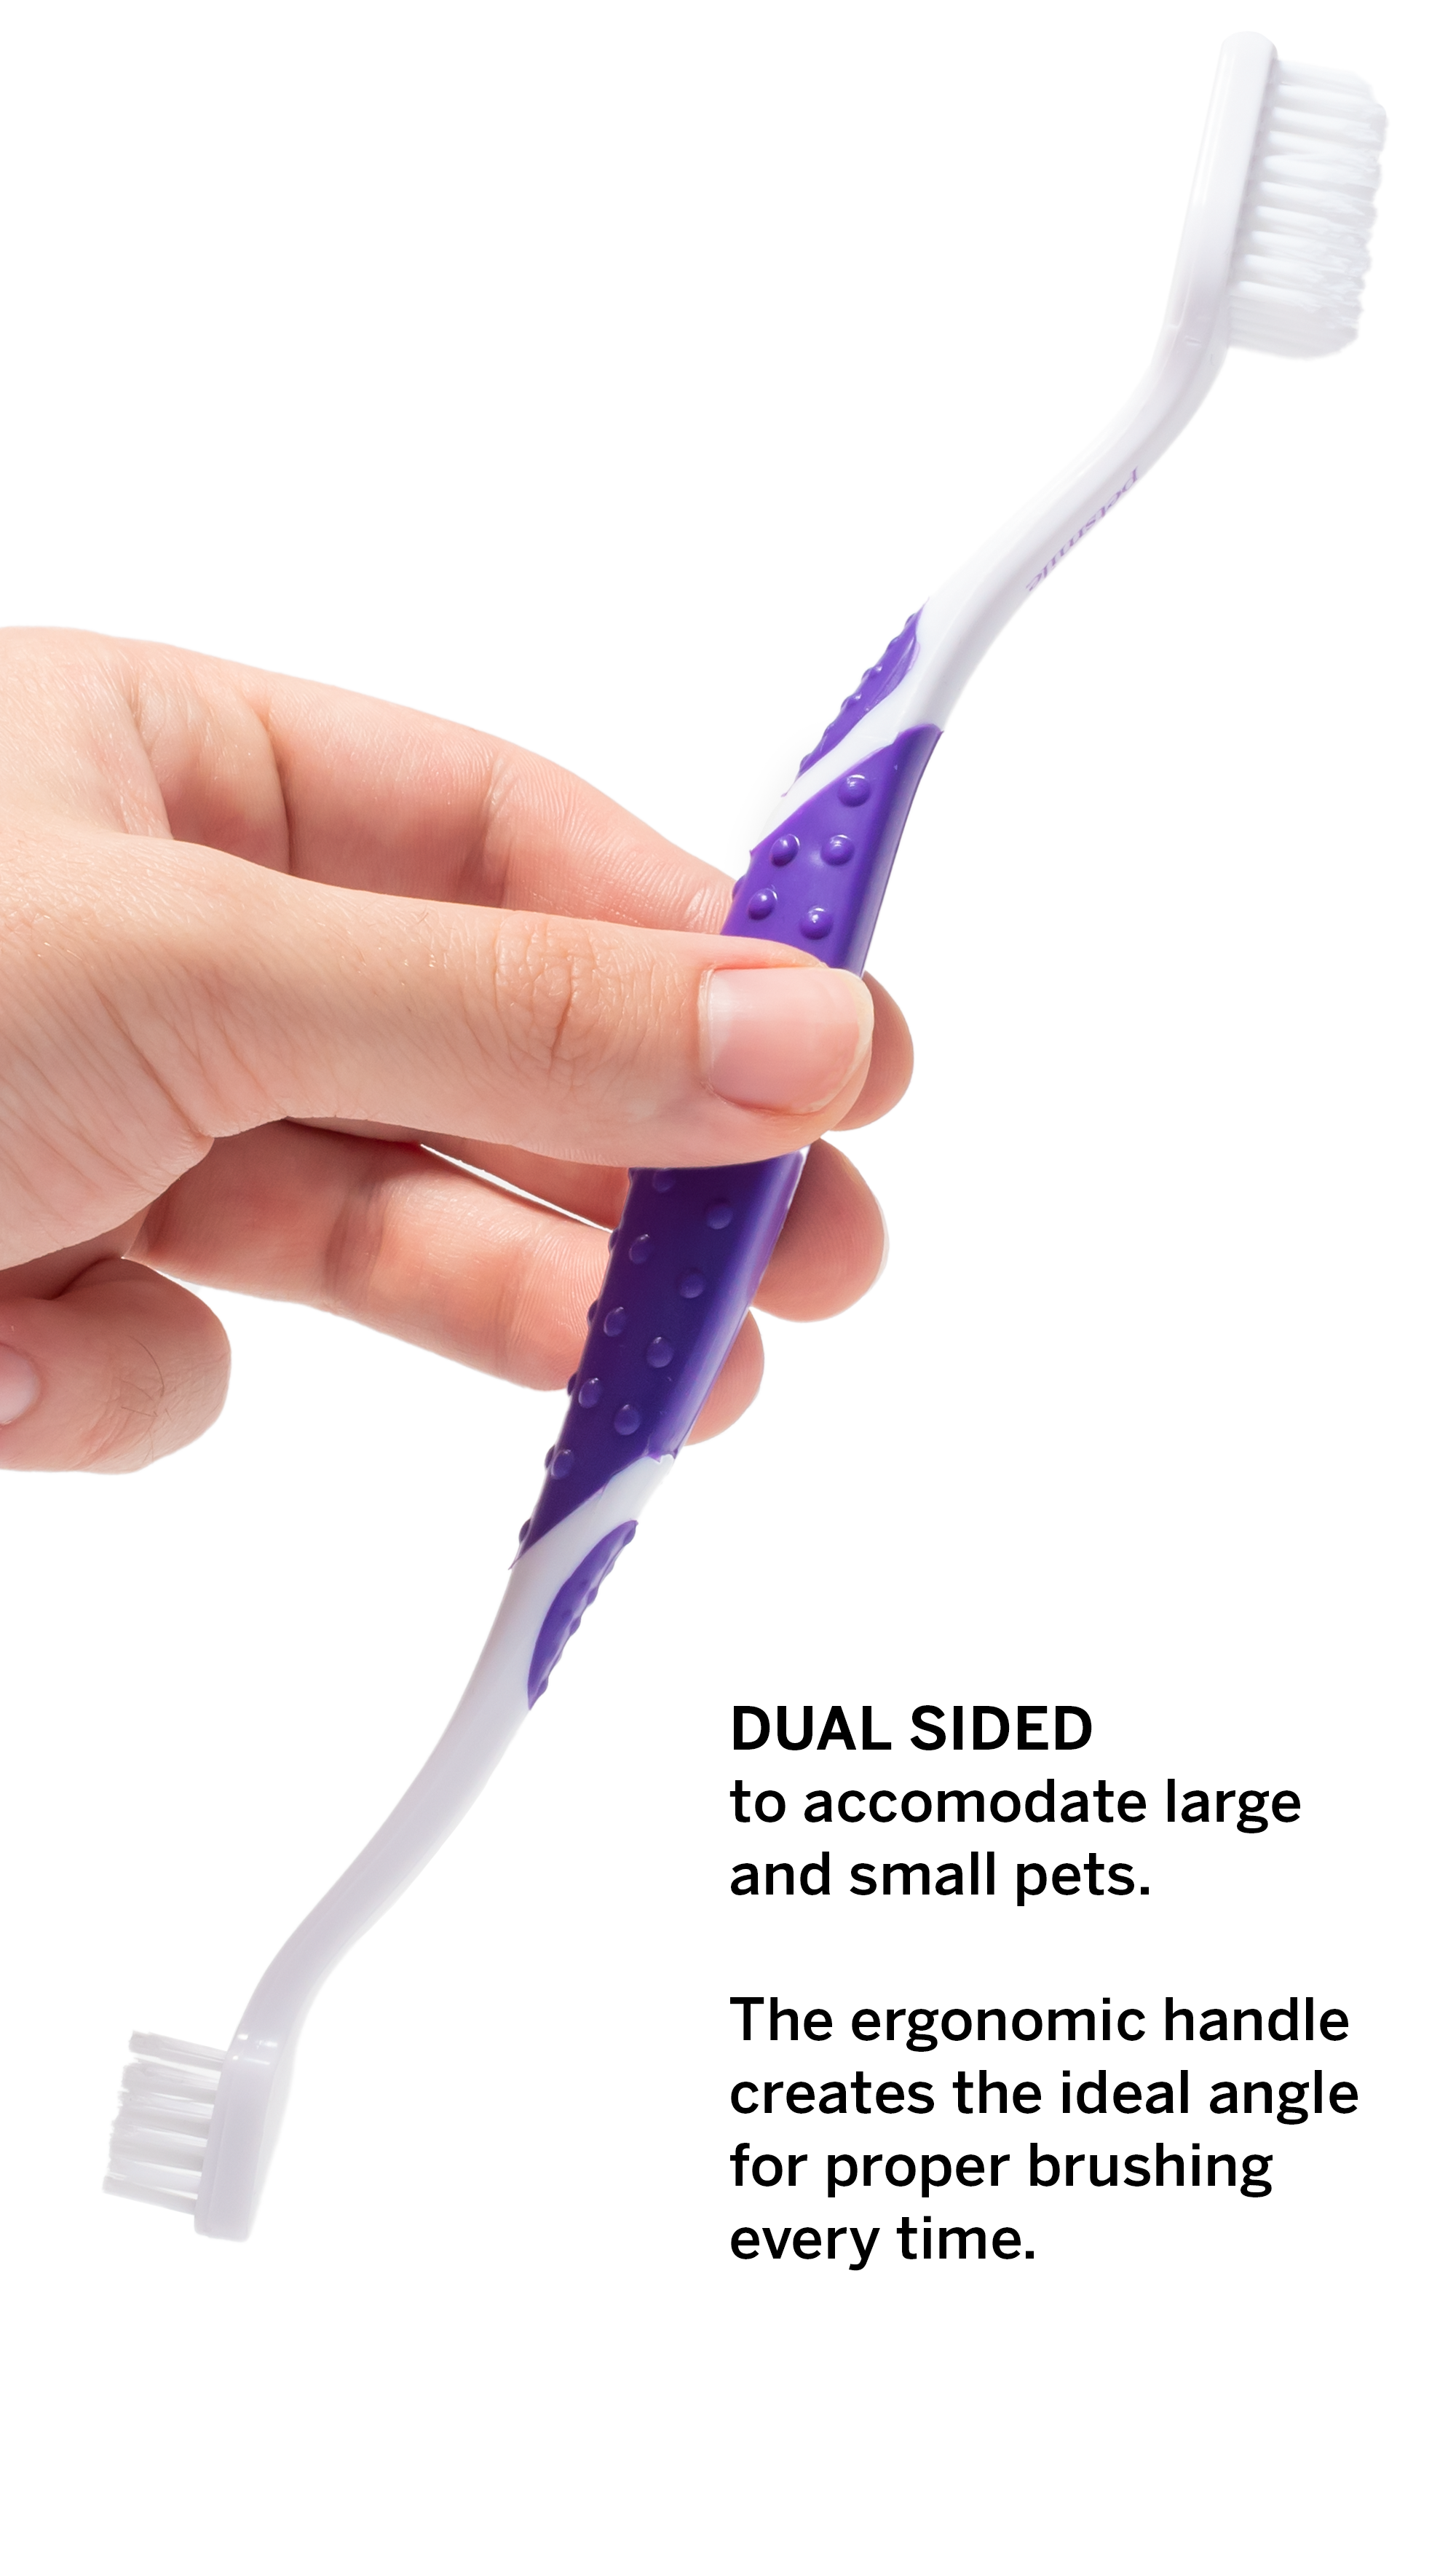 petsmile brush removes bacteria with ease , Dual-sided brush cleans teeth and gums , Purple toothbrush with 45-degree angle , Large dog toothpaste with London Broil flavor , Purple toothbrush that makes teeth cleaner